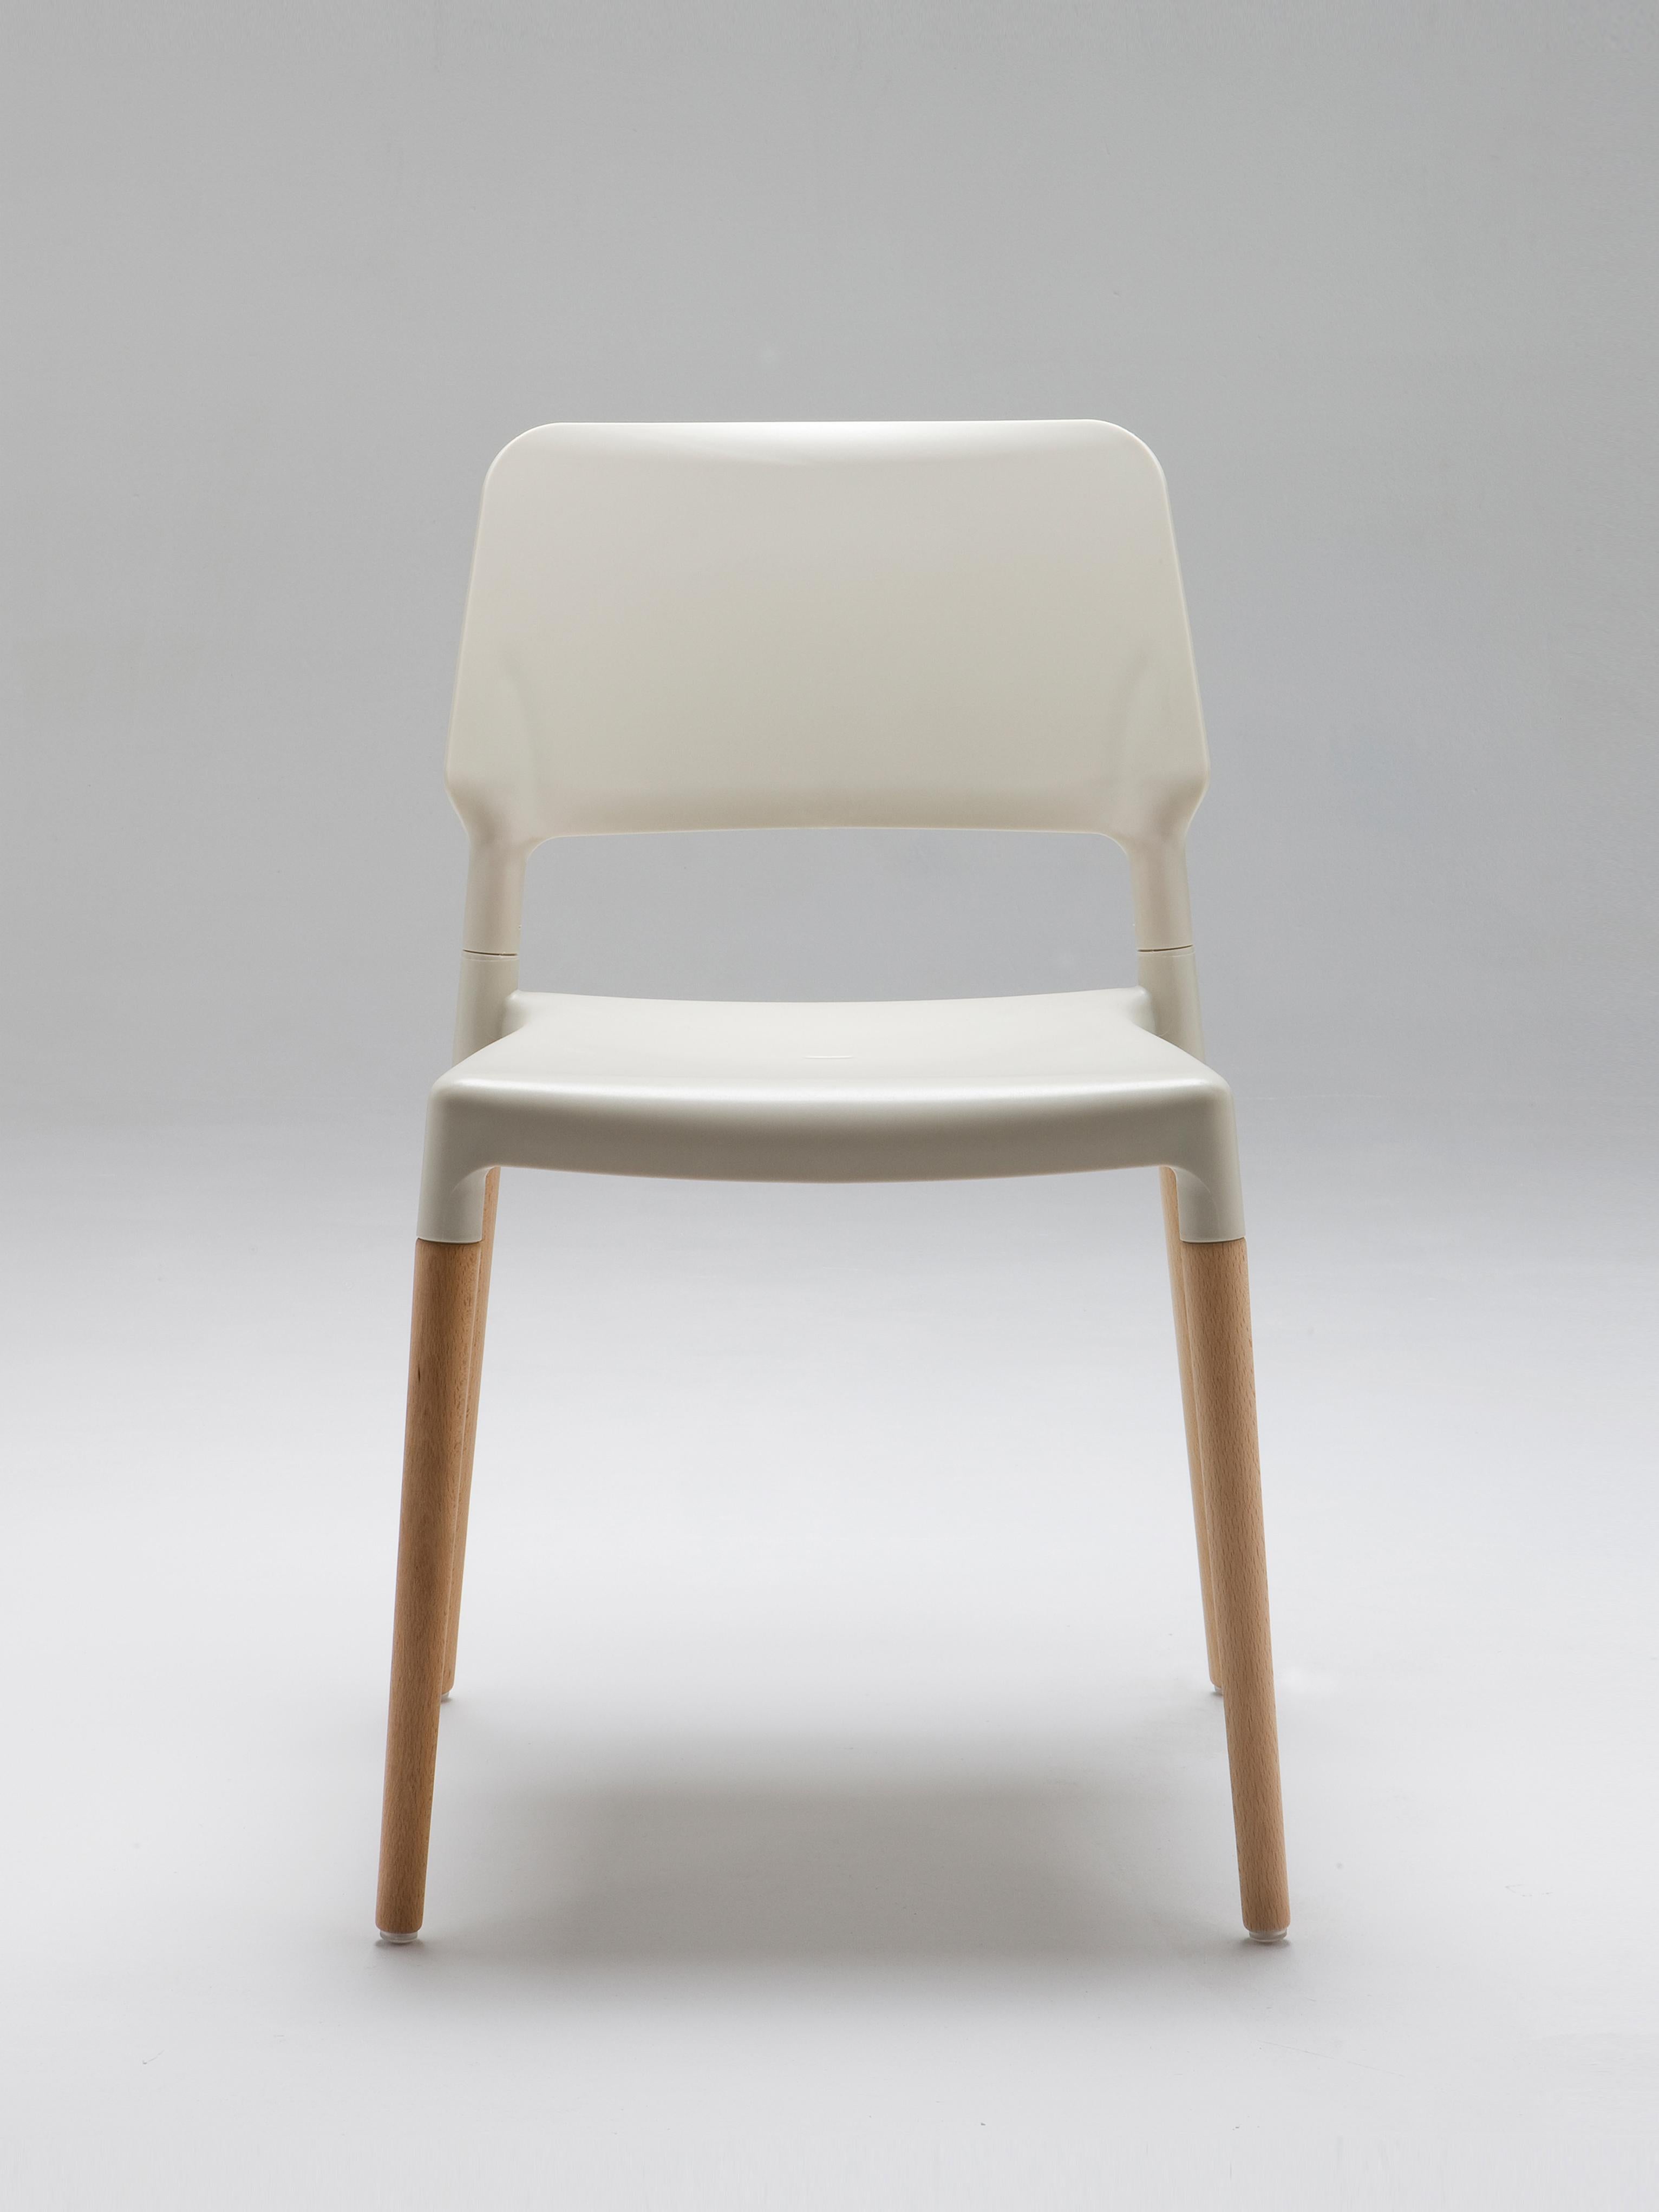 Set of 4 Belloch dining chair by Lagranja Design
Dimensions: D 50 x W 54 x H 79 cm
Materials: beech wood, polypropylene, fiberglass.
Available in other colors.
Available in beech wood or aluminum legs.

The Belloch chair is the result of